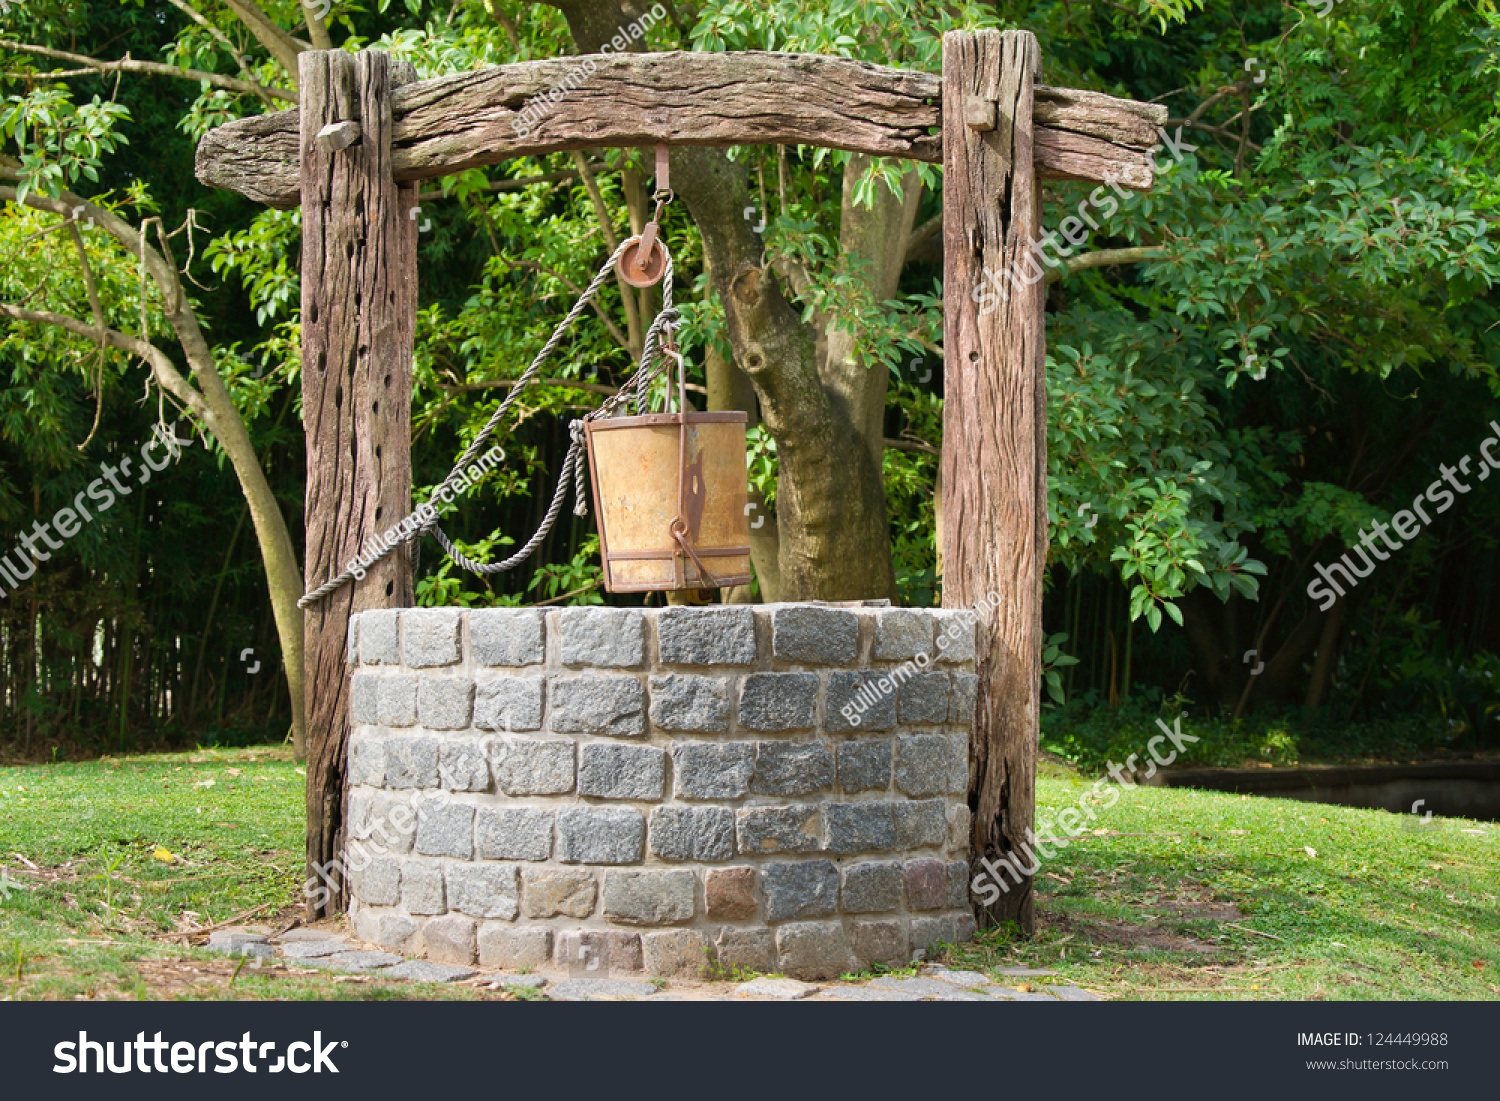 stock-photo-old-water-well-with-pulley-and-bucket-124449988.jpg